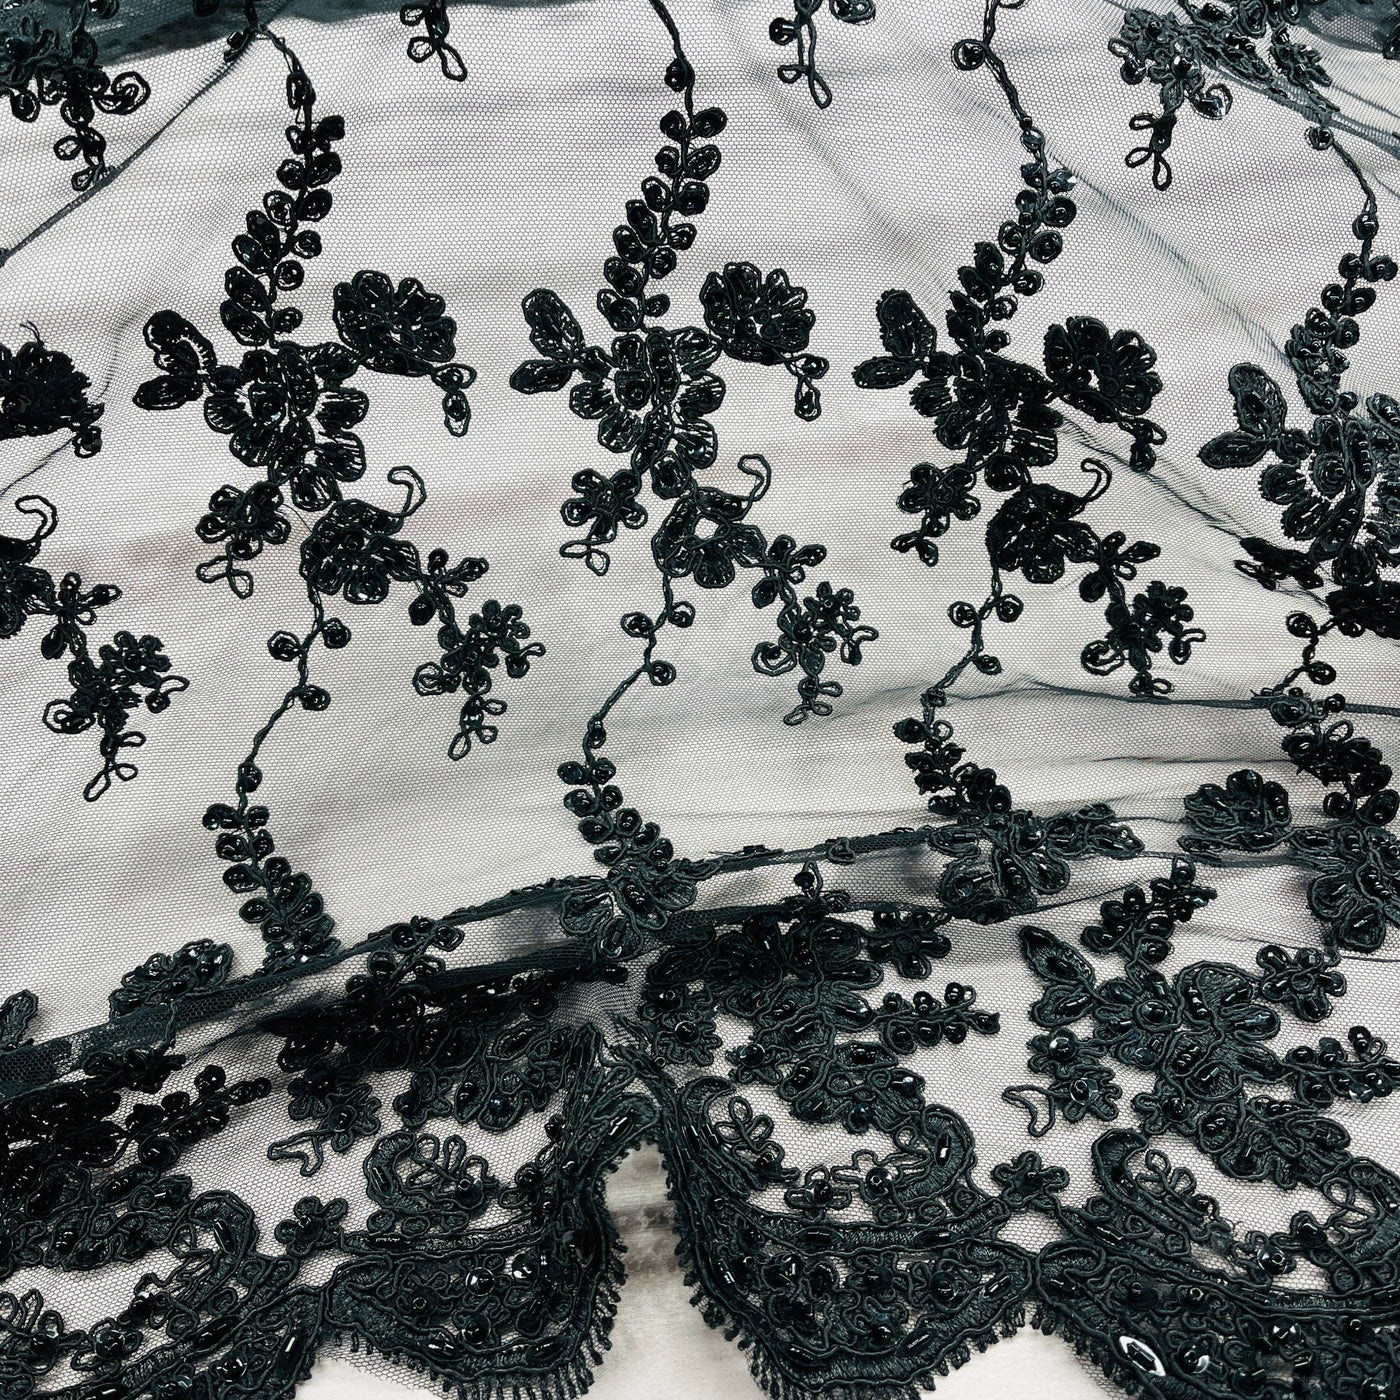 Beaded & Corded Lace Fabric Embroidered on 100% Polyester Net Mesh | Lace USA - GD-1819 Black